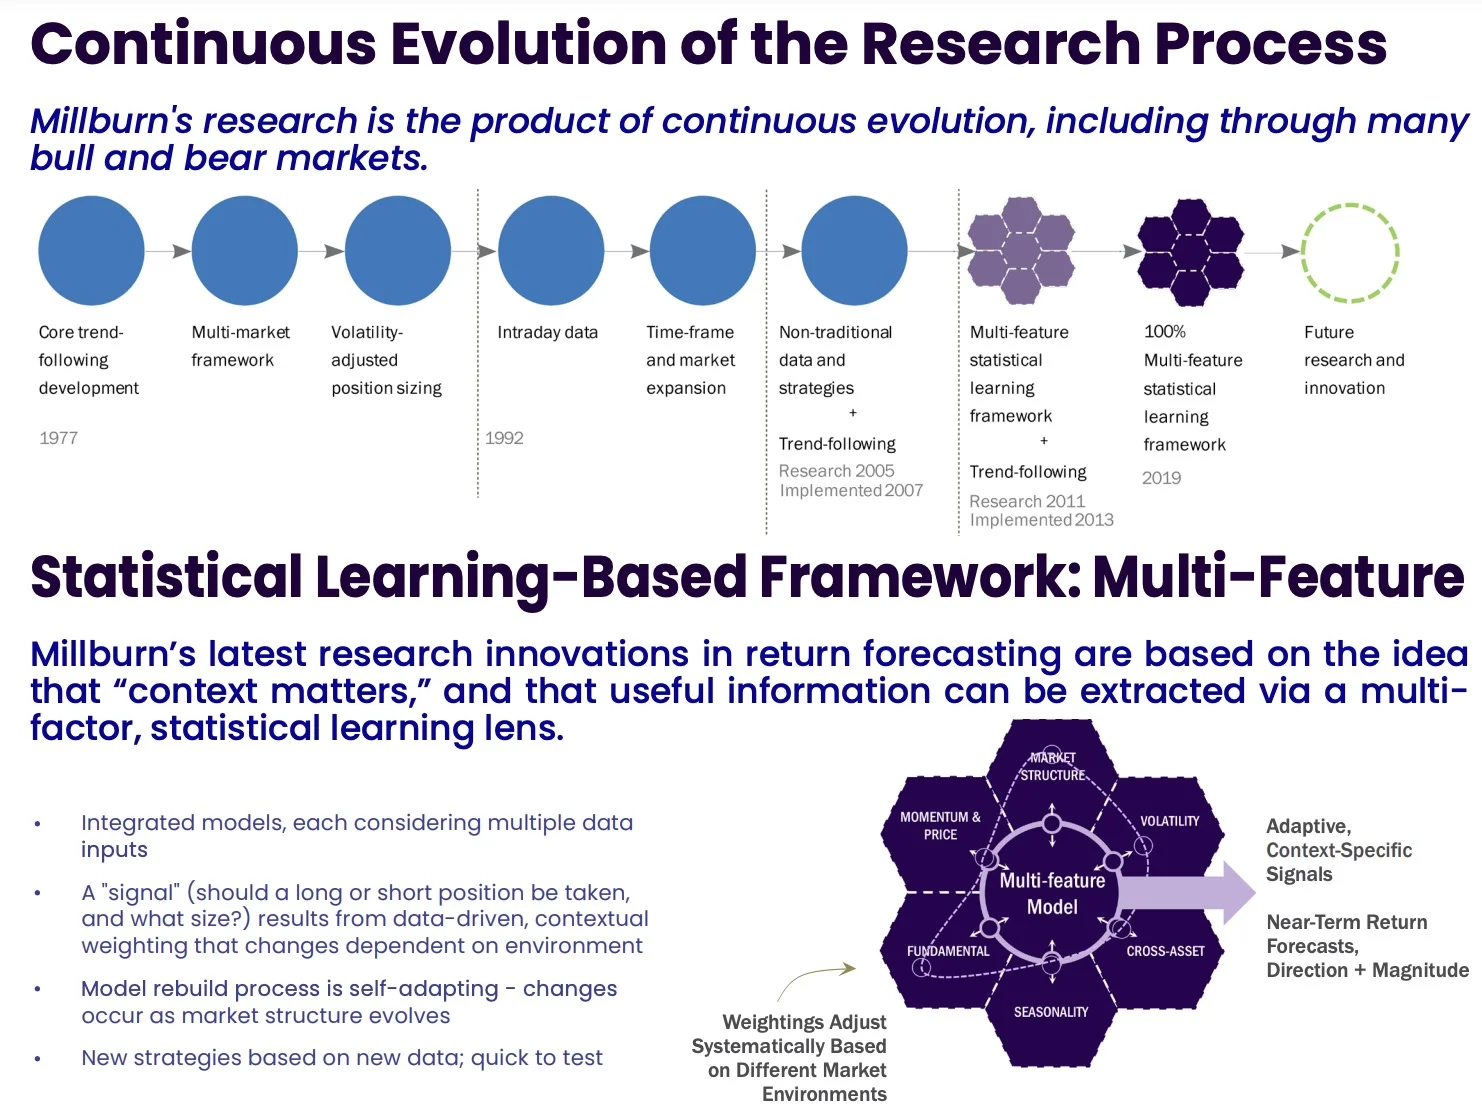 Catalyst/Millburn Evolution Of Research Process and Strategy over the years to develop a multi-strategy approach to Global Systematic 